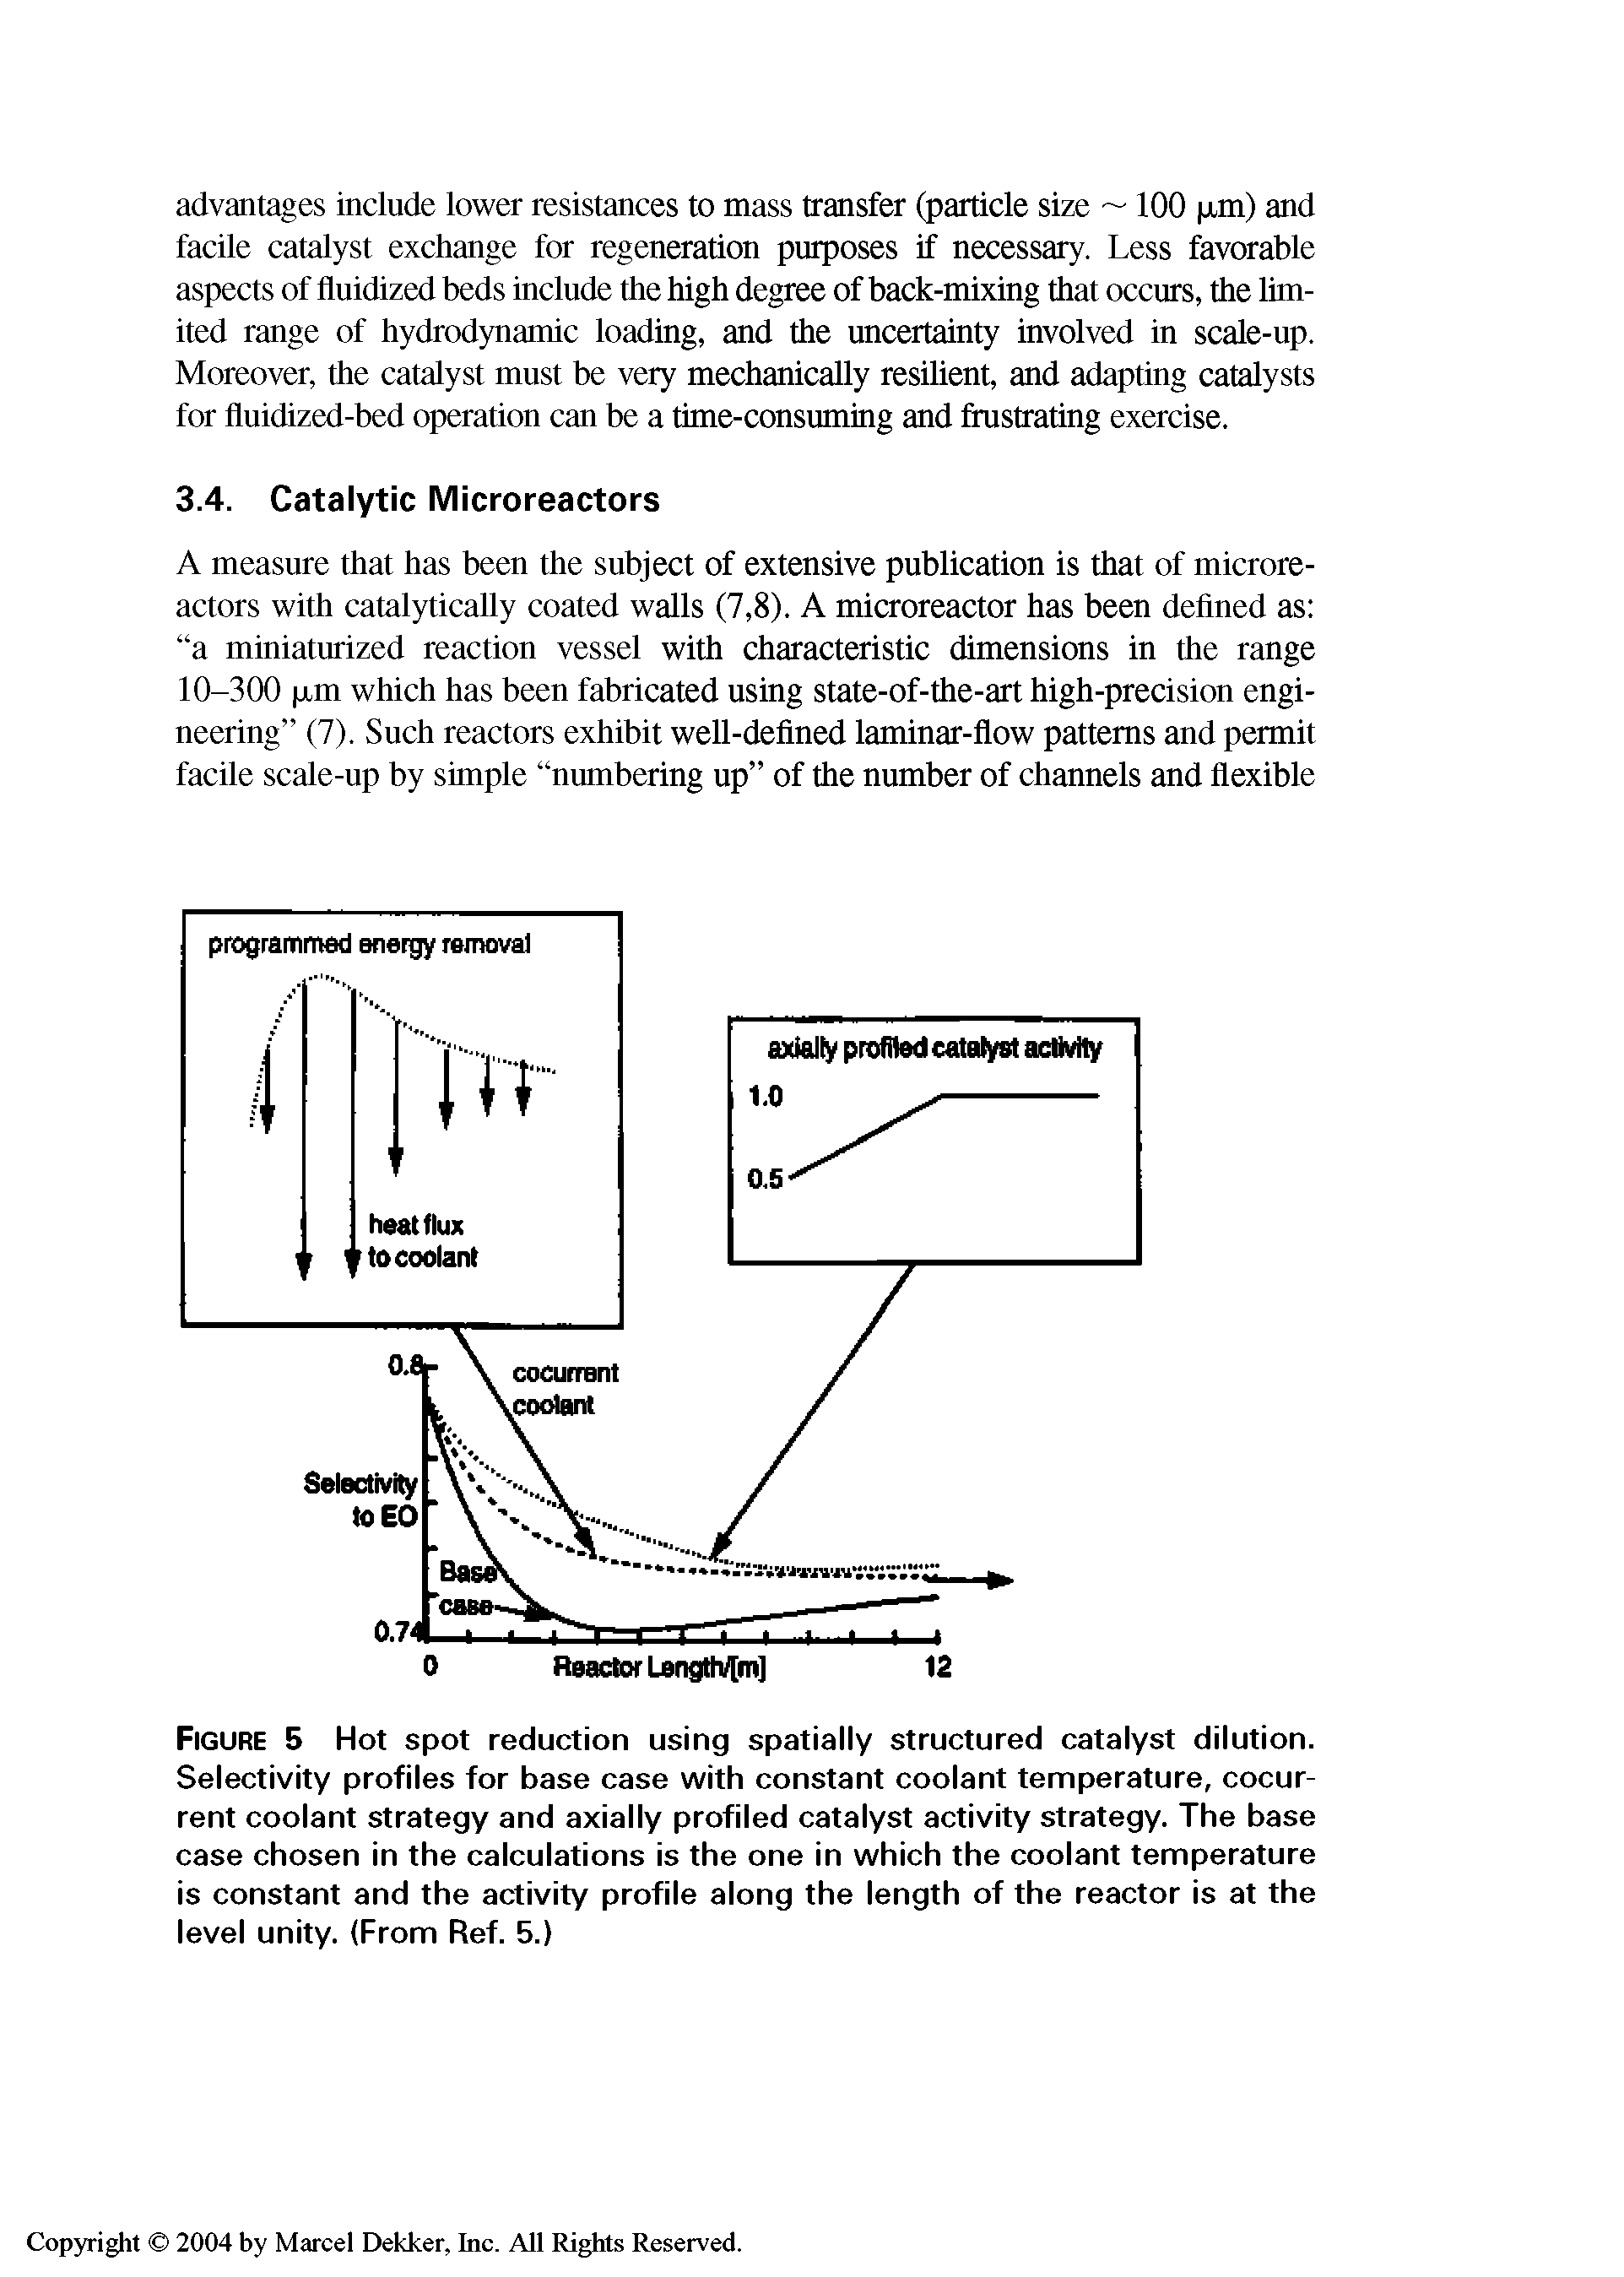 Figure 5 Hot spot reduction using spatially structured catalyst dilution. Selectivity profiles for base case with constant coolant temperature, cocurrent coolant strategy and axially profiled catalyst activity strategy. The base case chosen in the calculations is the one in which the coolant temperature is constant and the activity profile along the length of the reactor is at the level unity. (From Ref. 5.)...